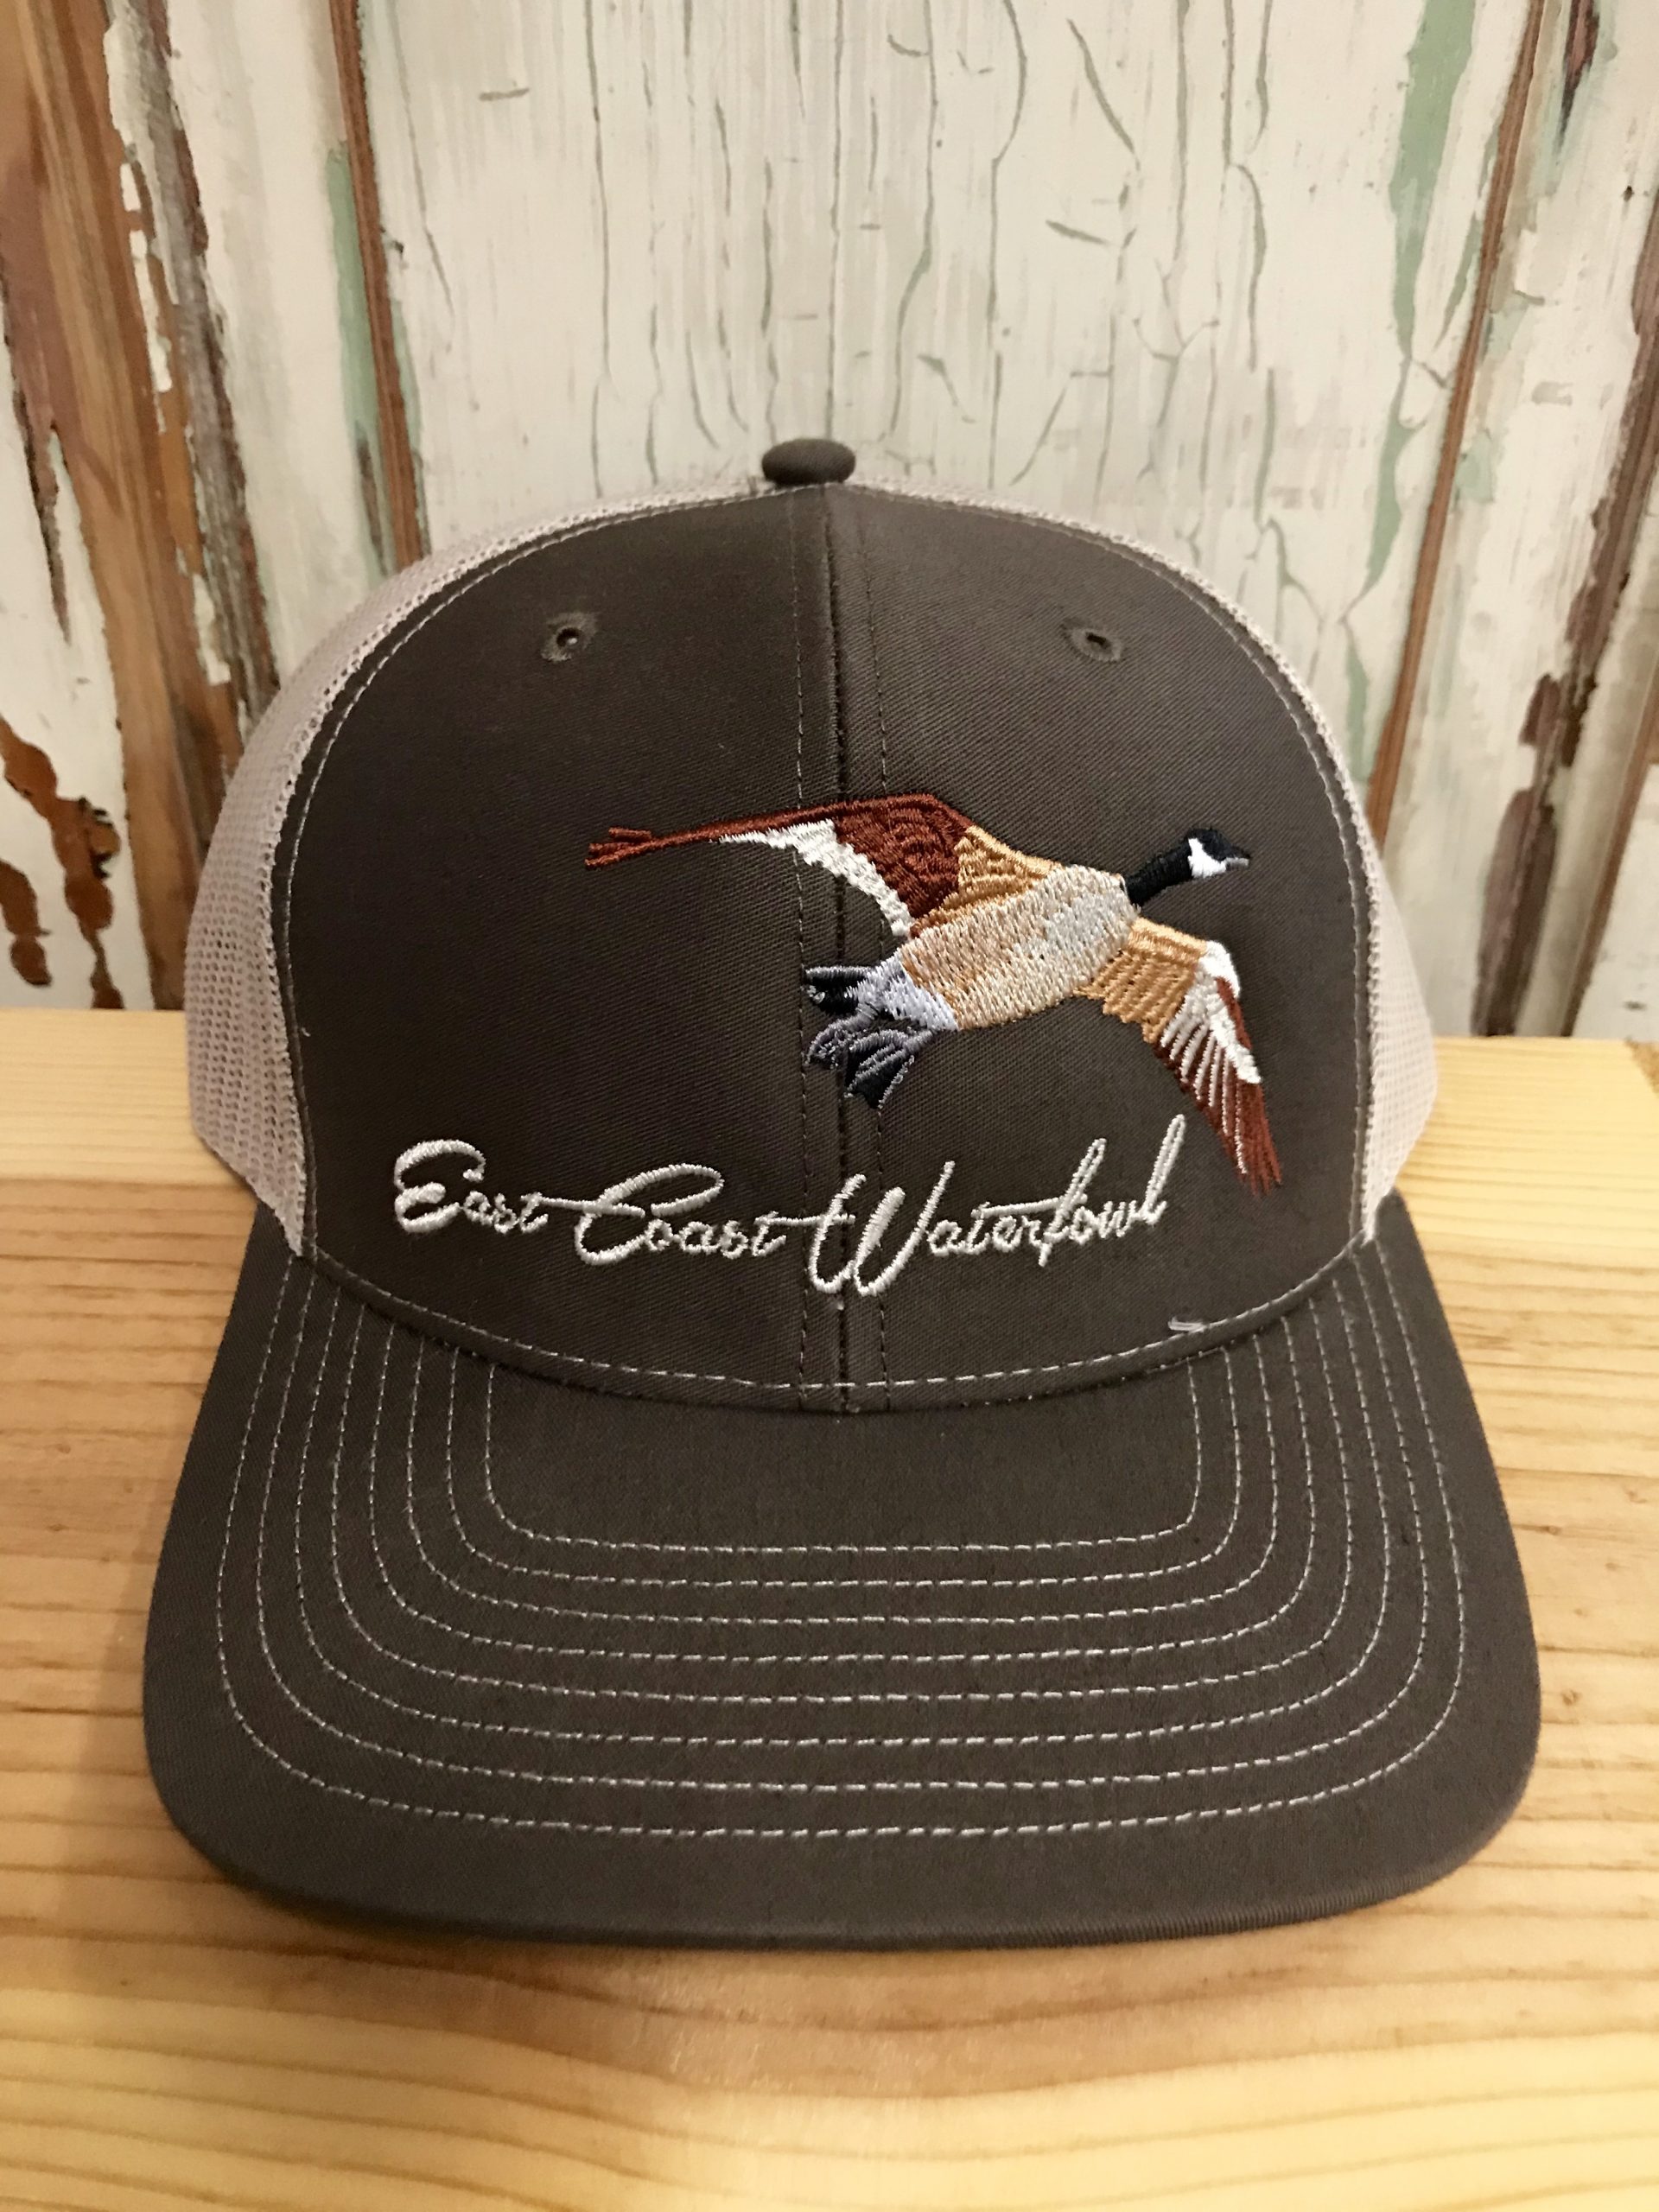 East Coast Waterfowl Goose Trucker Hat Brown/Khaki – AG Outfitters NC